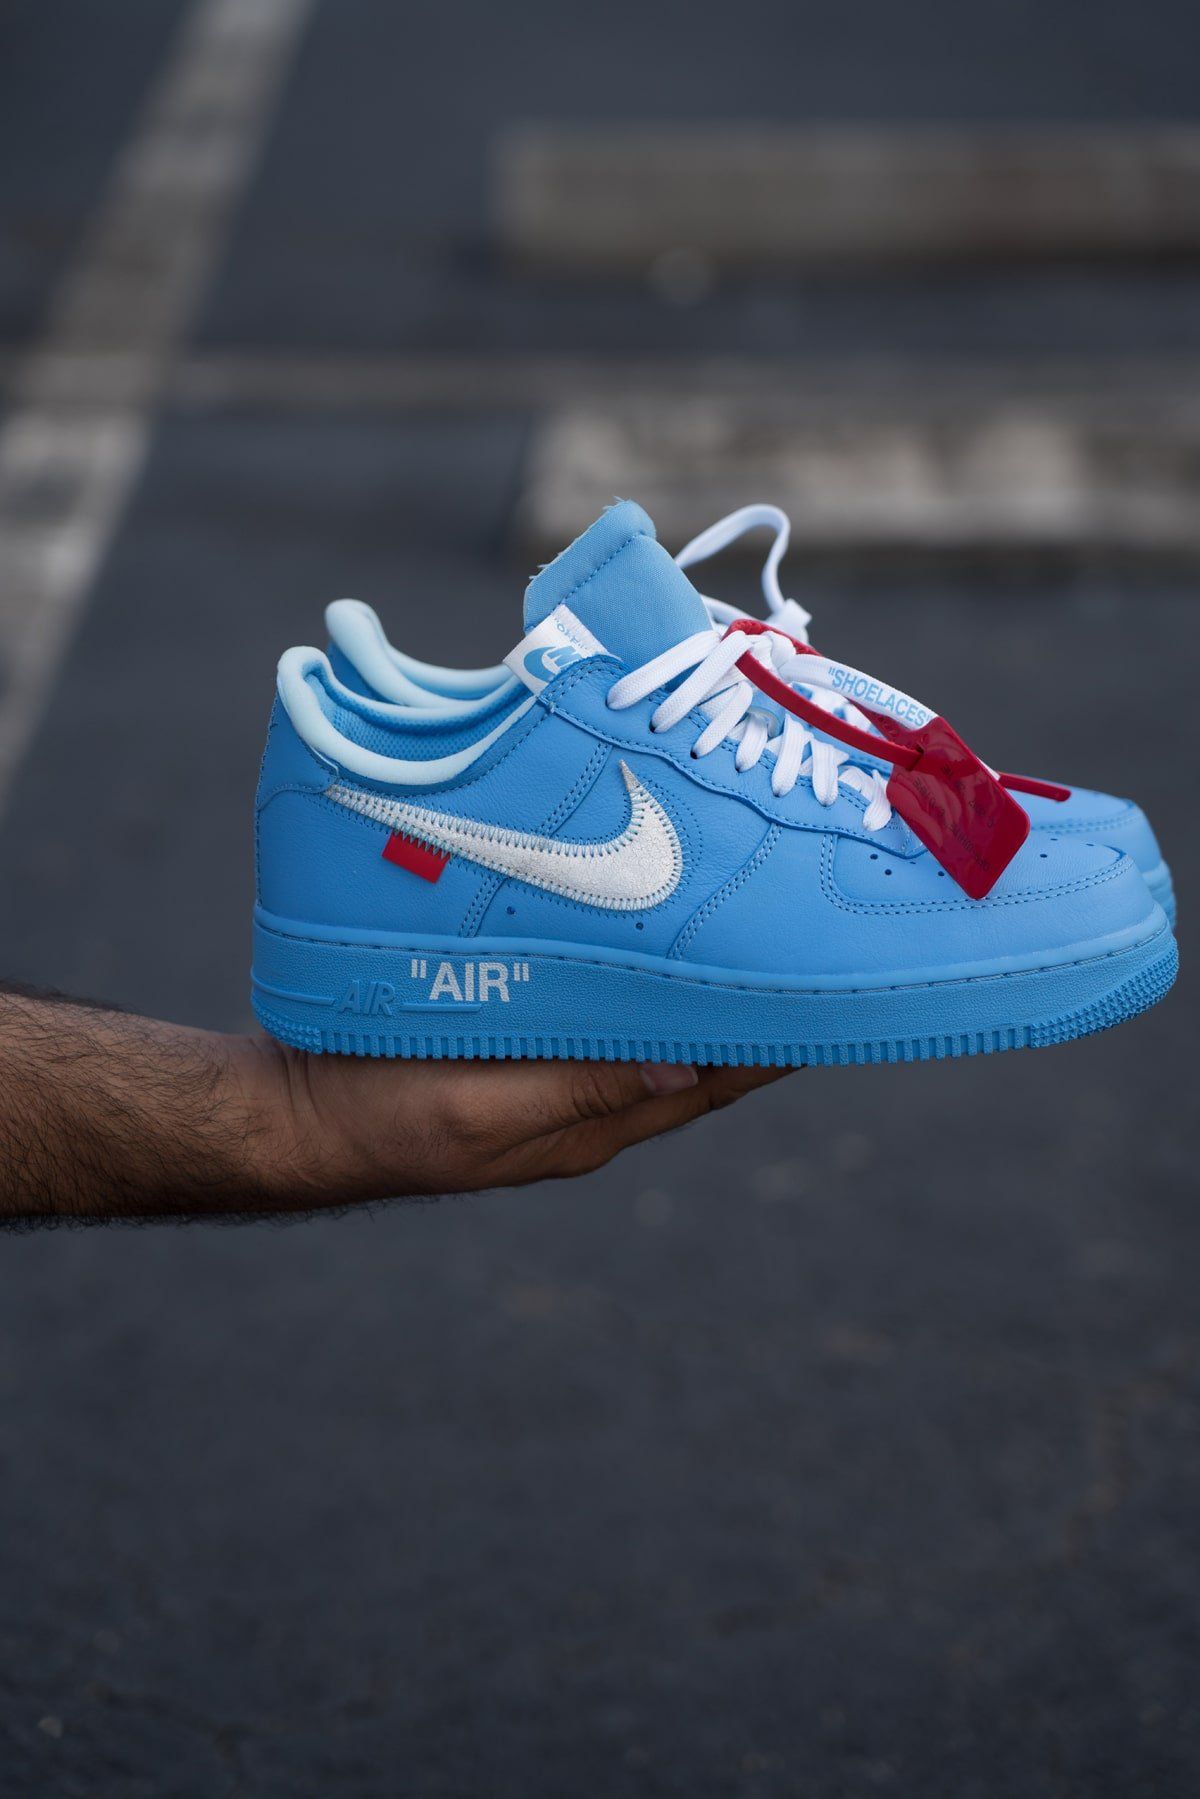 How To Buy The Blue Off White X Nike Air Force 1 Mca Chicago Nike Max 1 3 Trainer Tebow Height Calculator Chart Nike Sb Gato White Gold Blue Cross